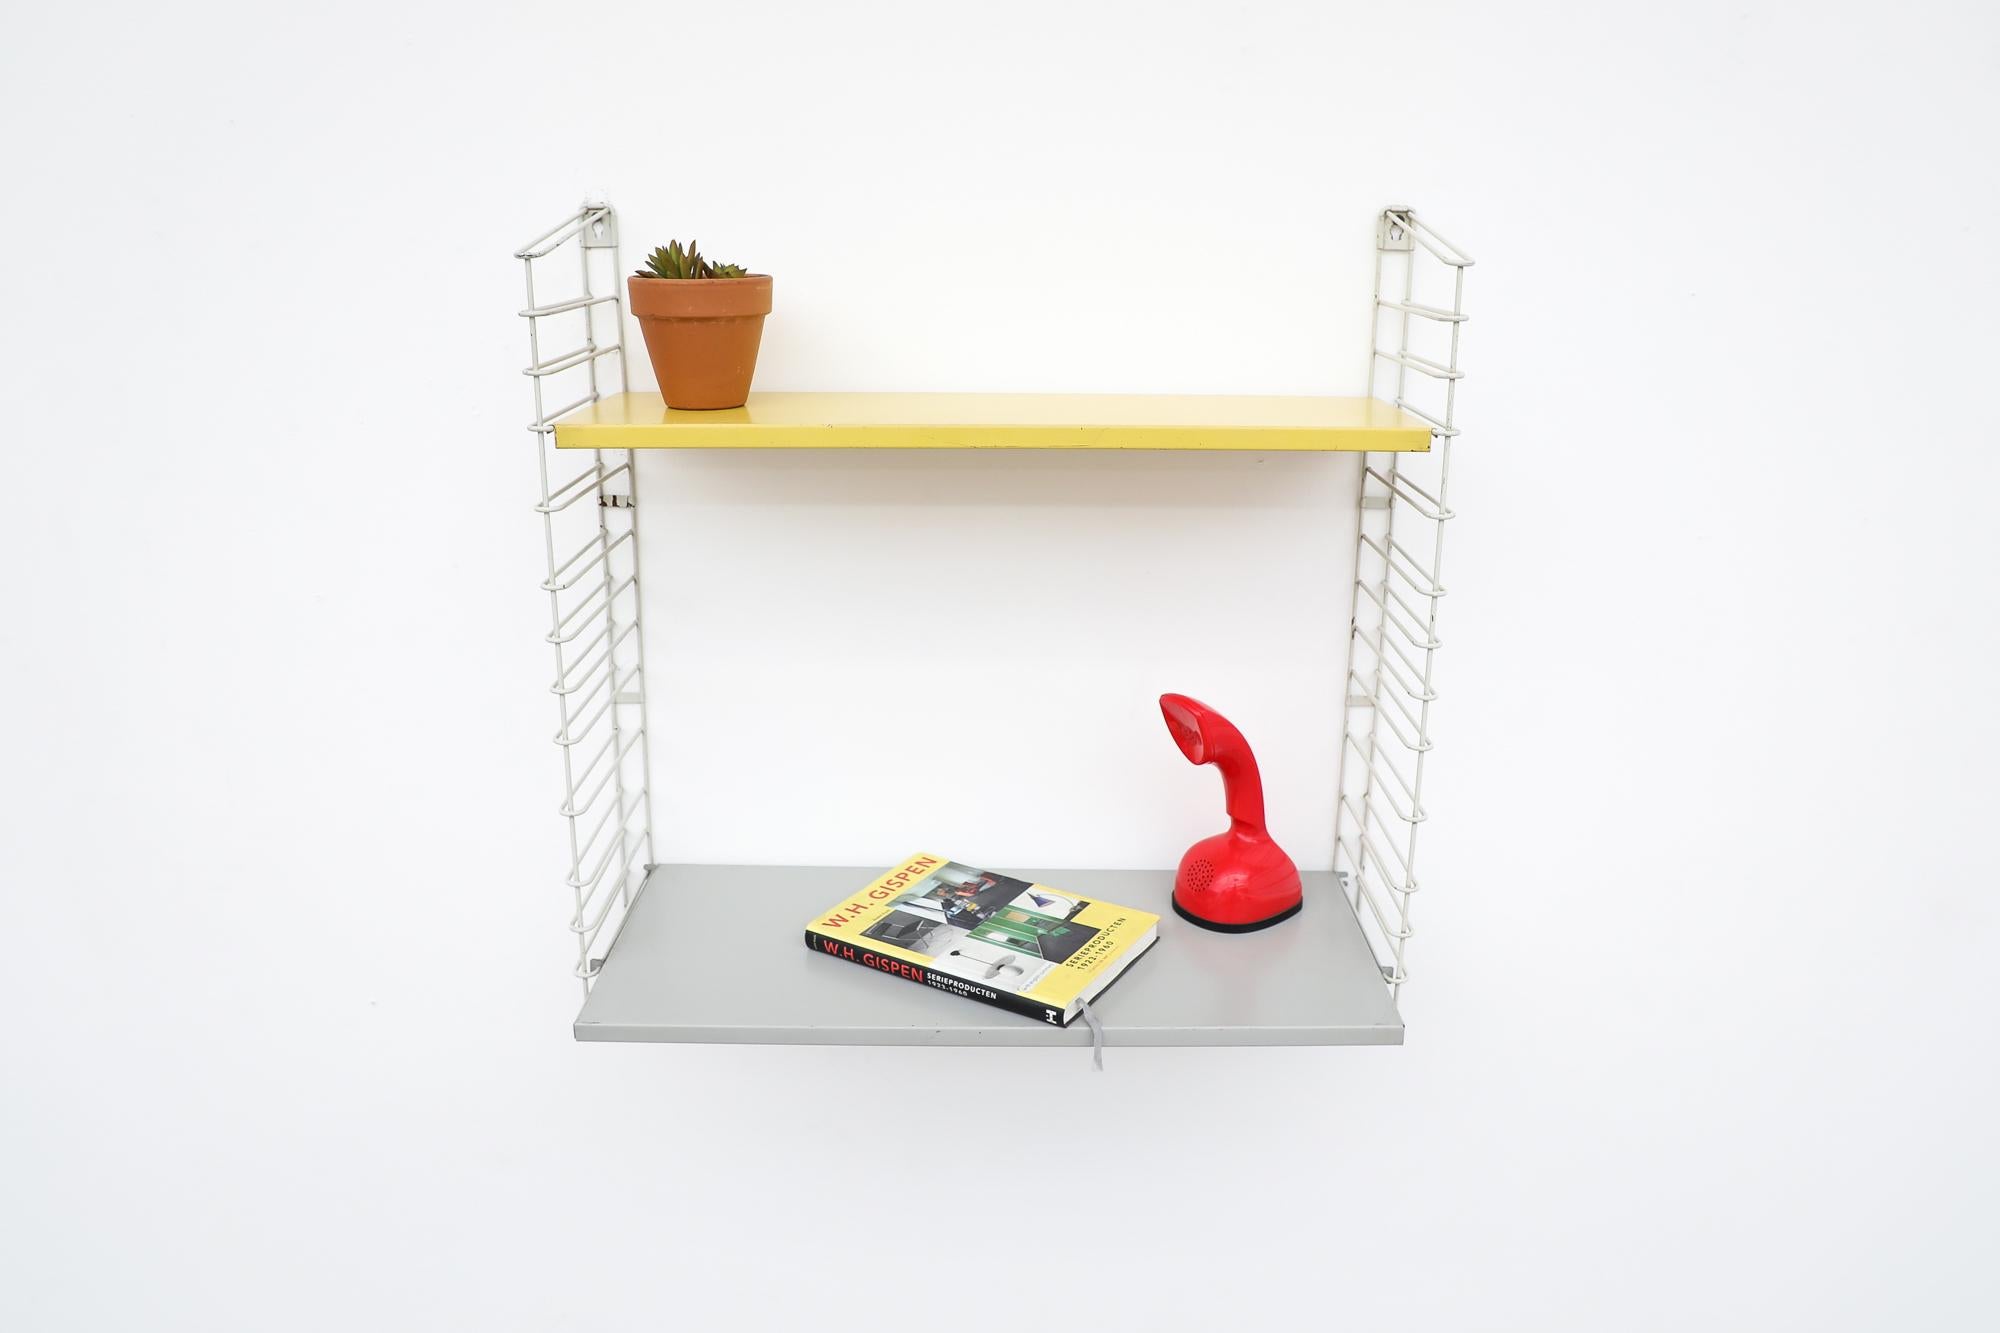 Midcentury TOMADO industrial shelving with a yellow shelf and grey extended desk shelf on white enameled metal wire risers. Designed by Jan van der Togt. Shelves rest on the wire risers and can be arranged to different heights. In original condition